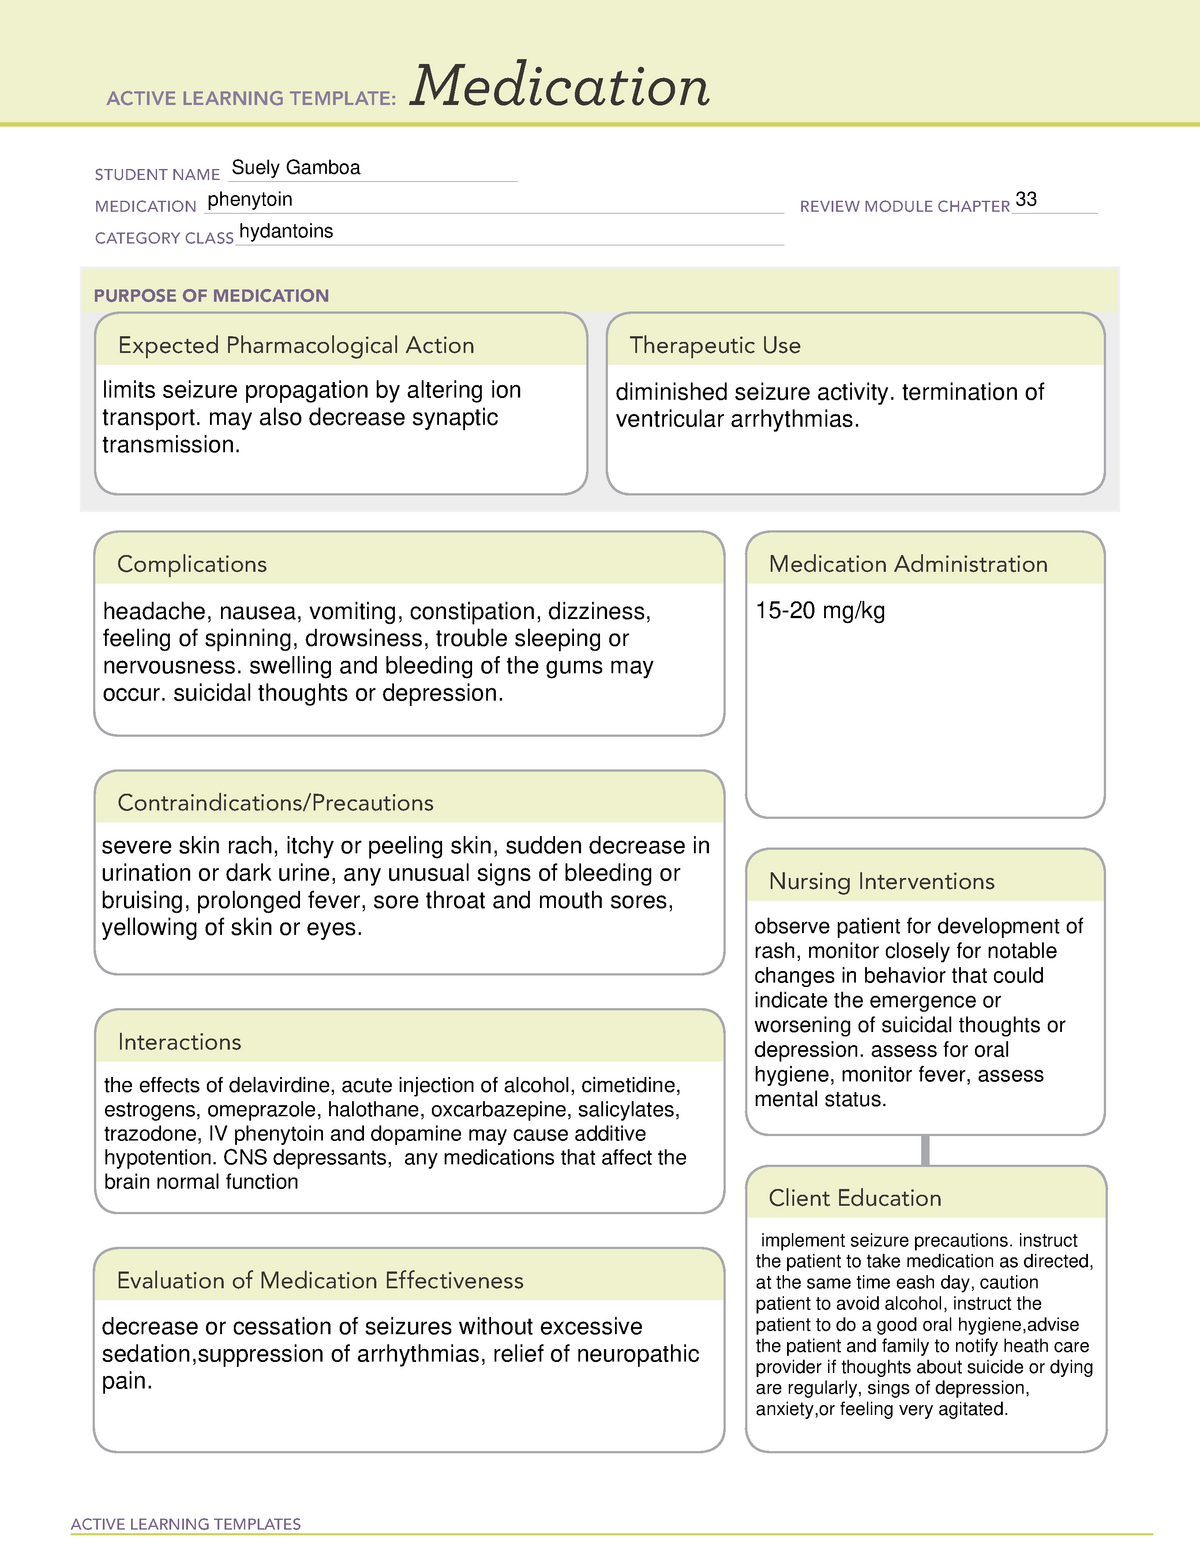 epinephrine-medical-surgical-ati-template-active-learning-templates